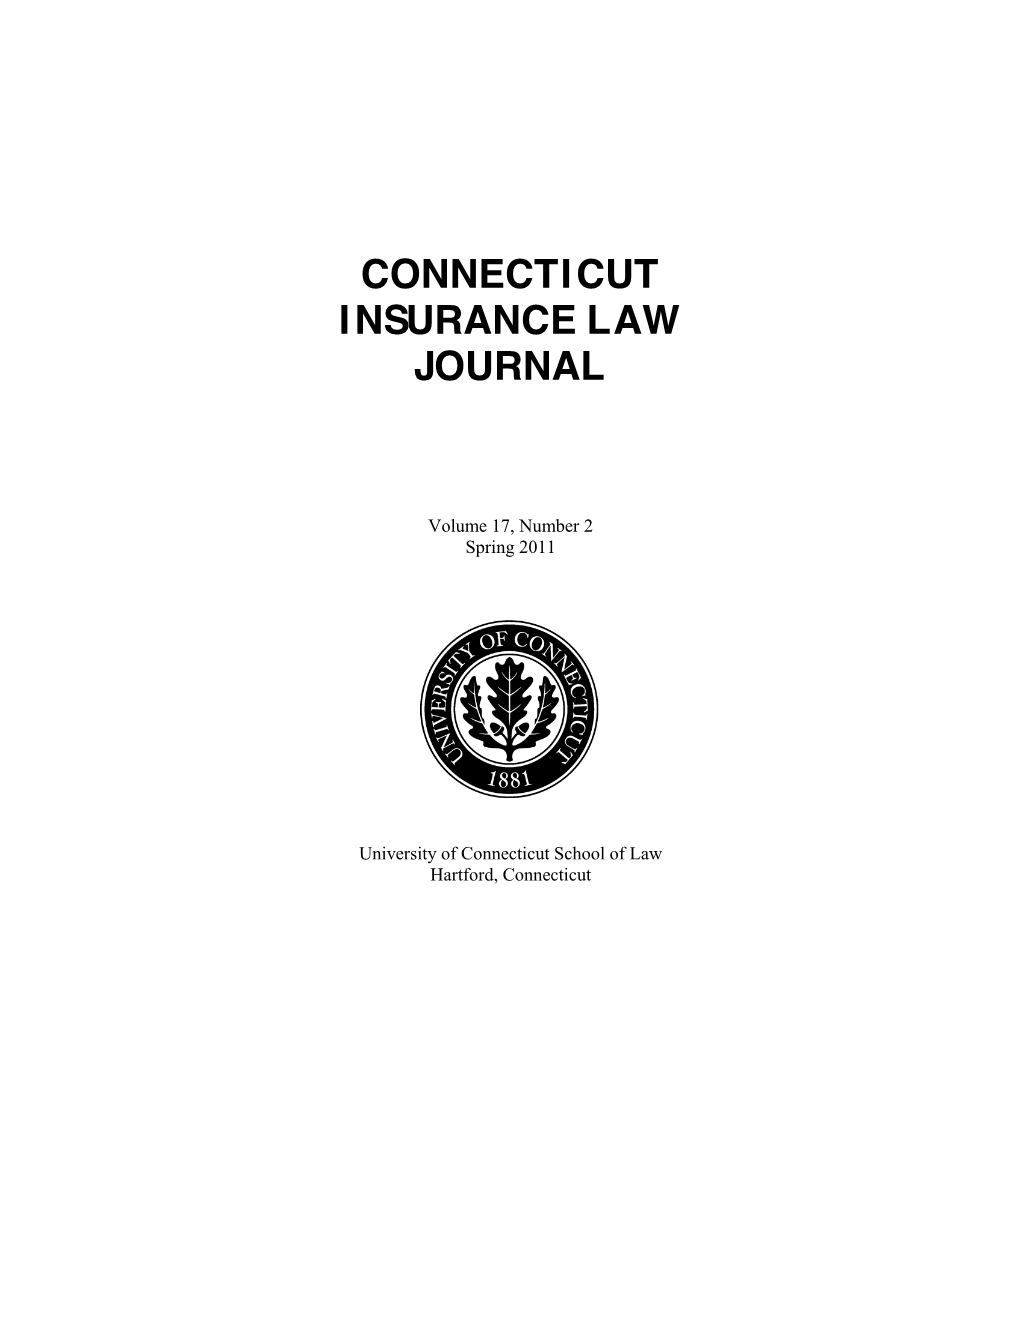 Connecticut I Nsurance Law Journal